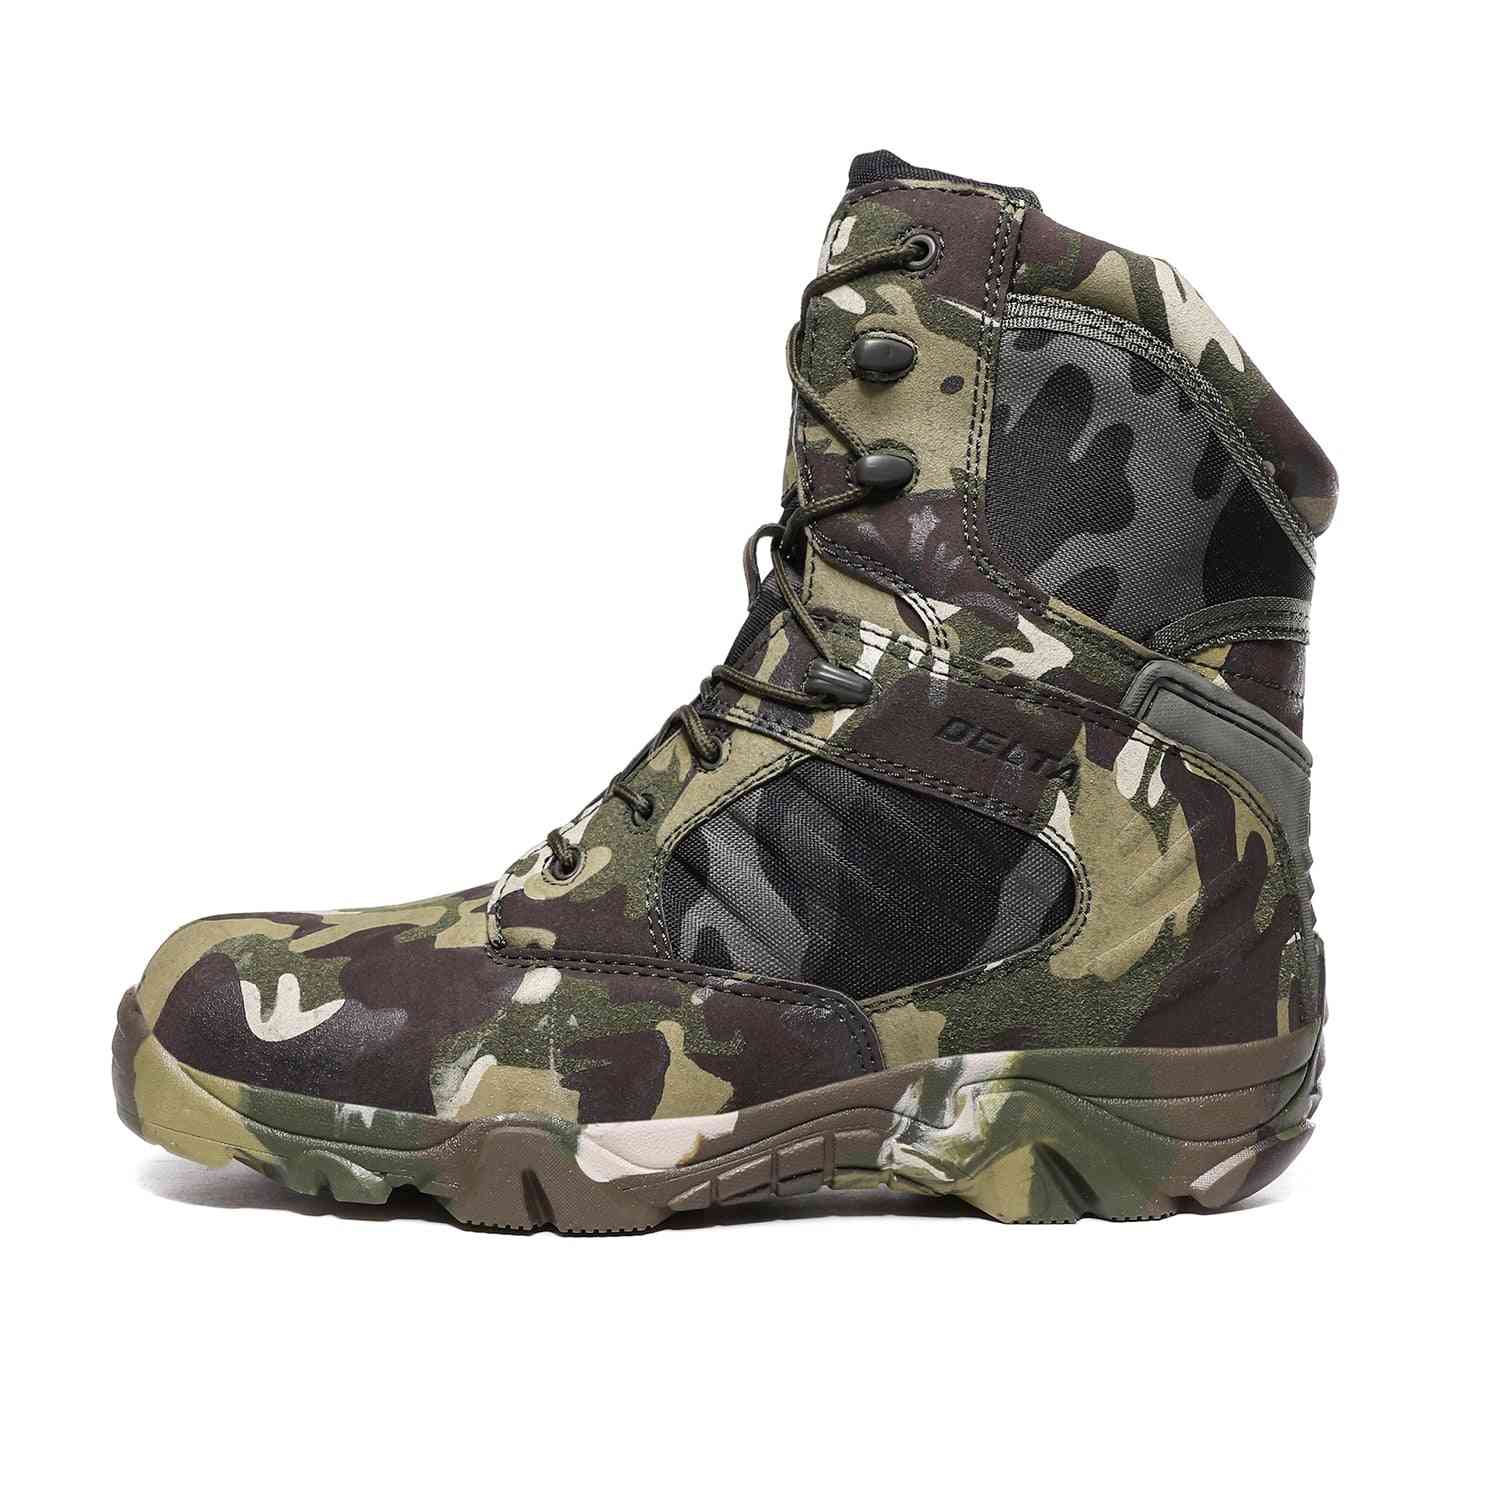 Army Combat Boots, Men Breathable Tactical Anti-slip Shoes